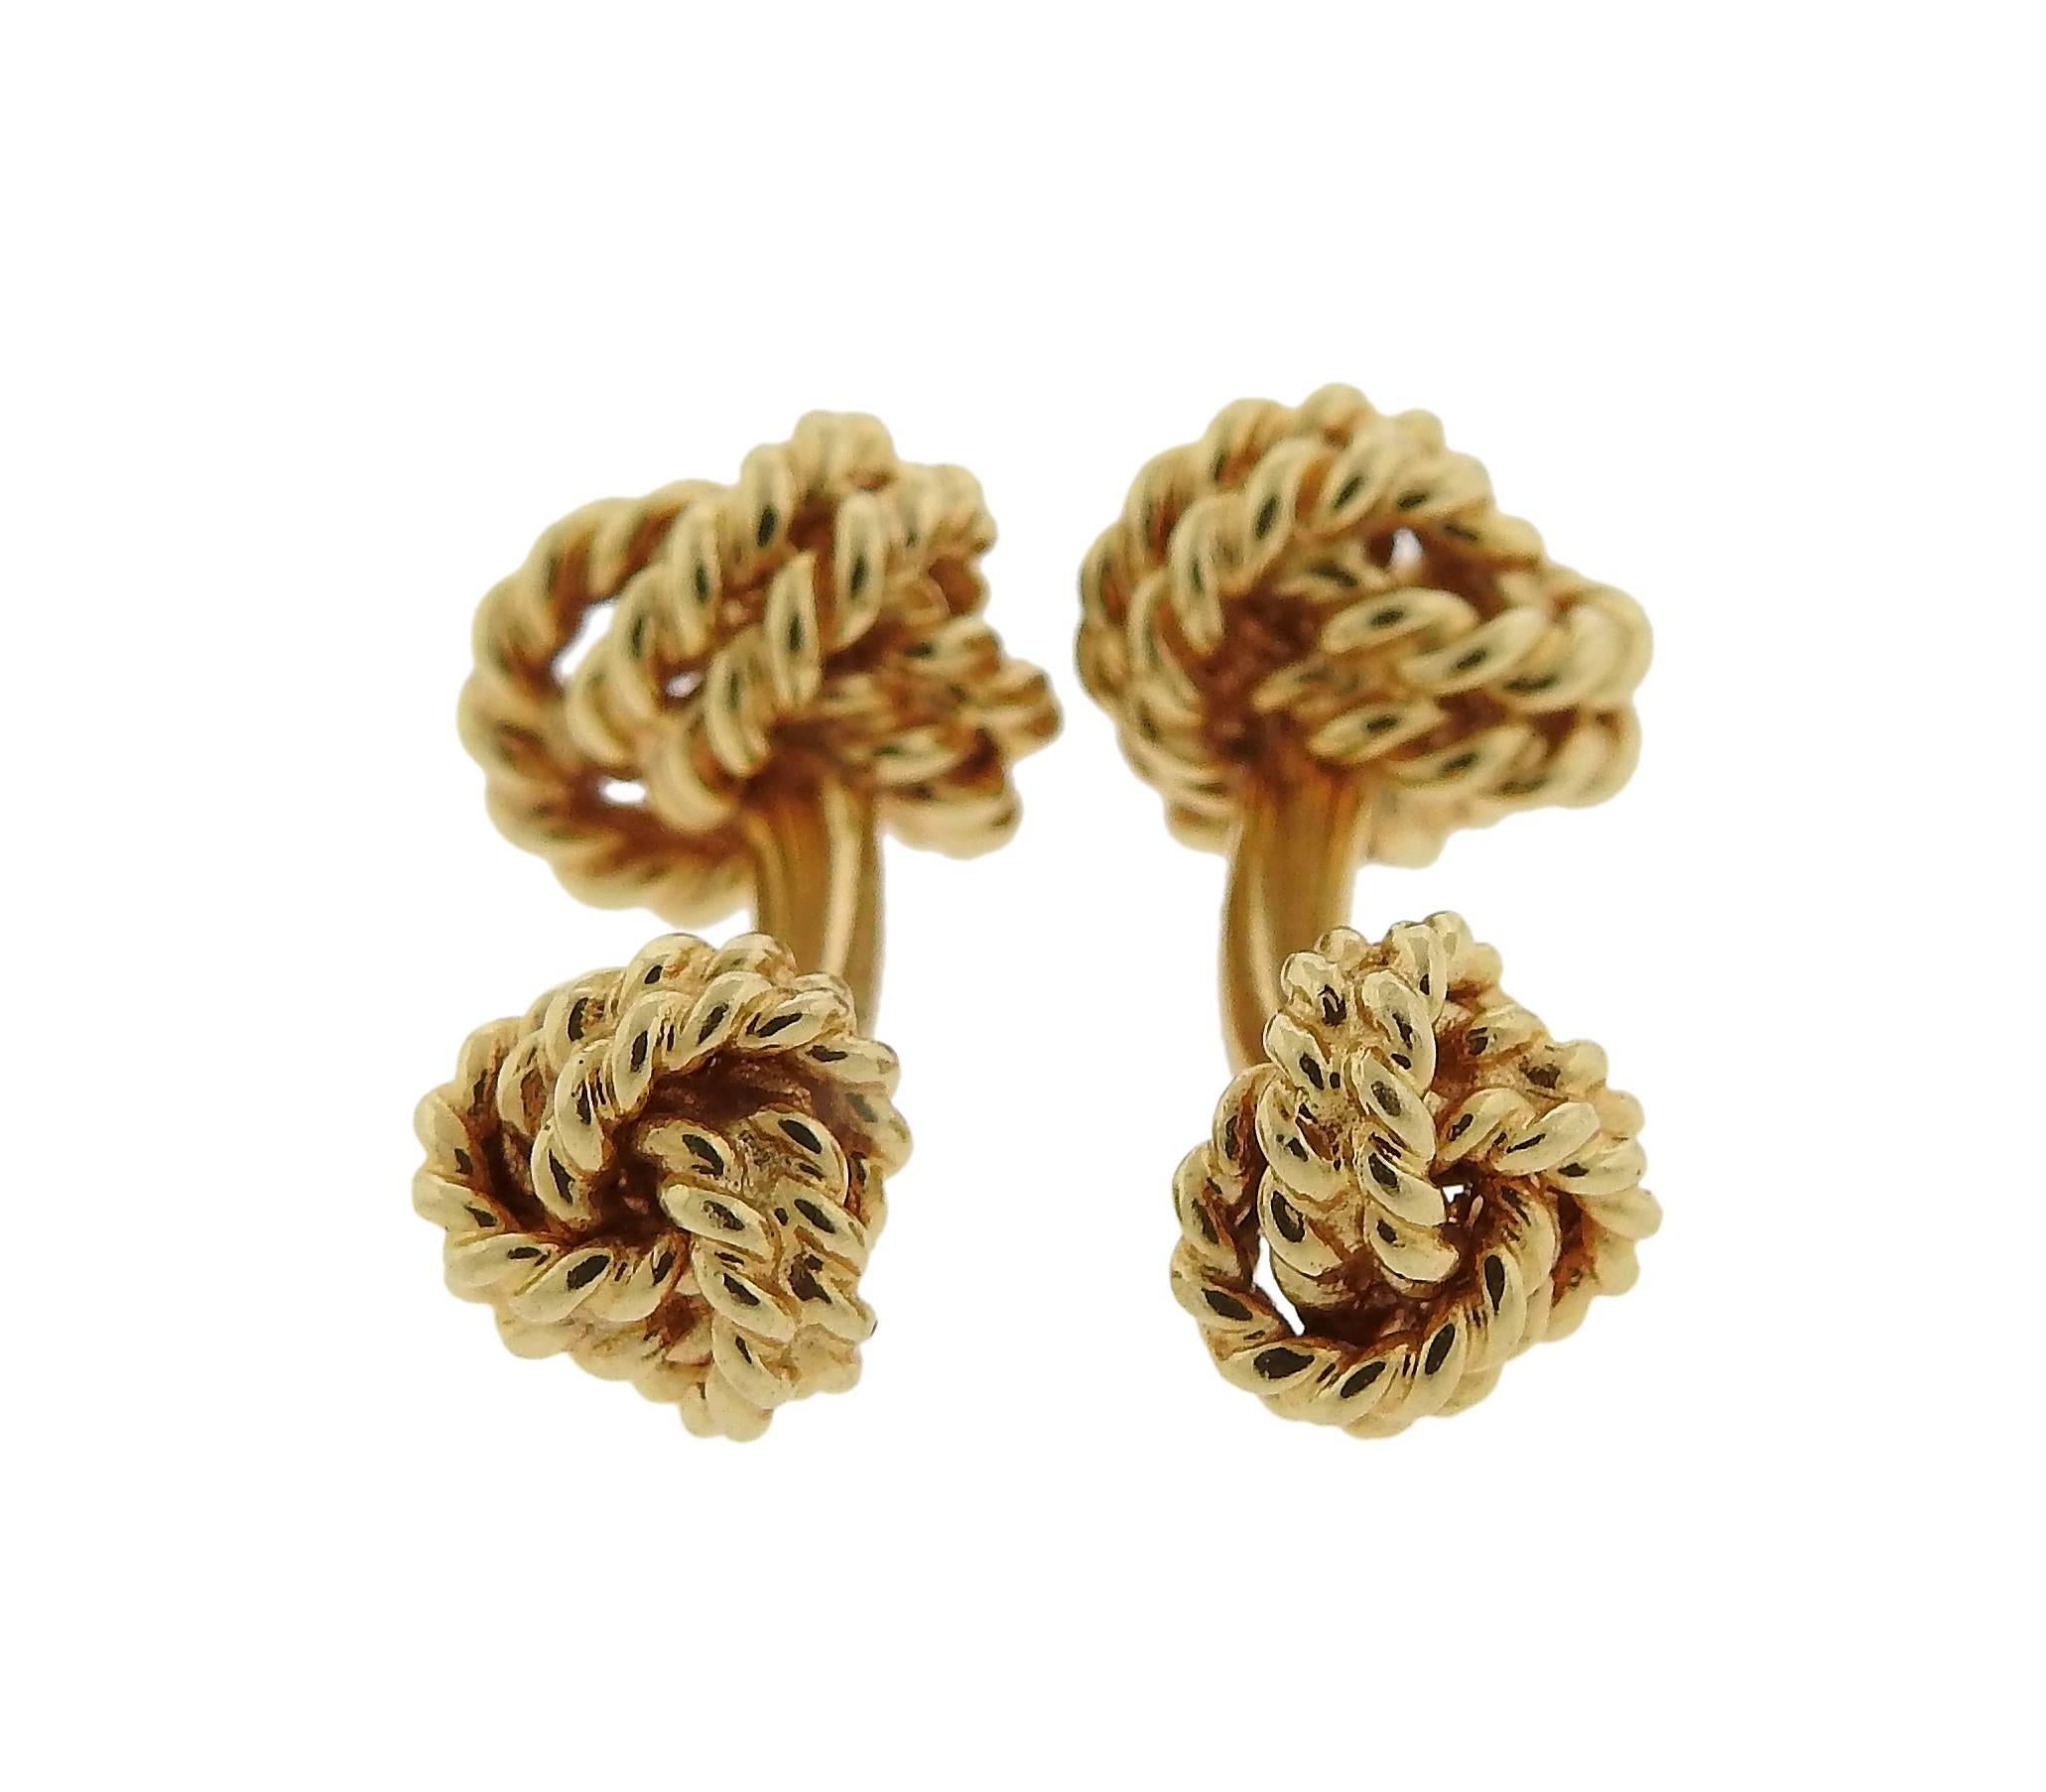 Pair of classic 14k yellow gold woven knot cufflinks, crafted by Tiffany & Co. Top measures 13mm x 12mm, and weigh 15 grams. Marked: Tiffany & Co, 14k. 